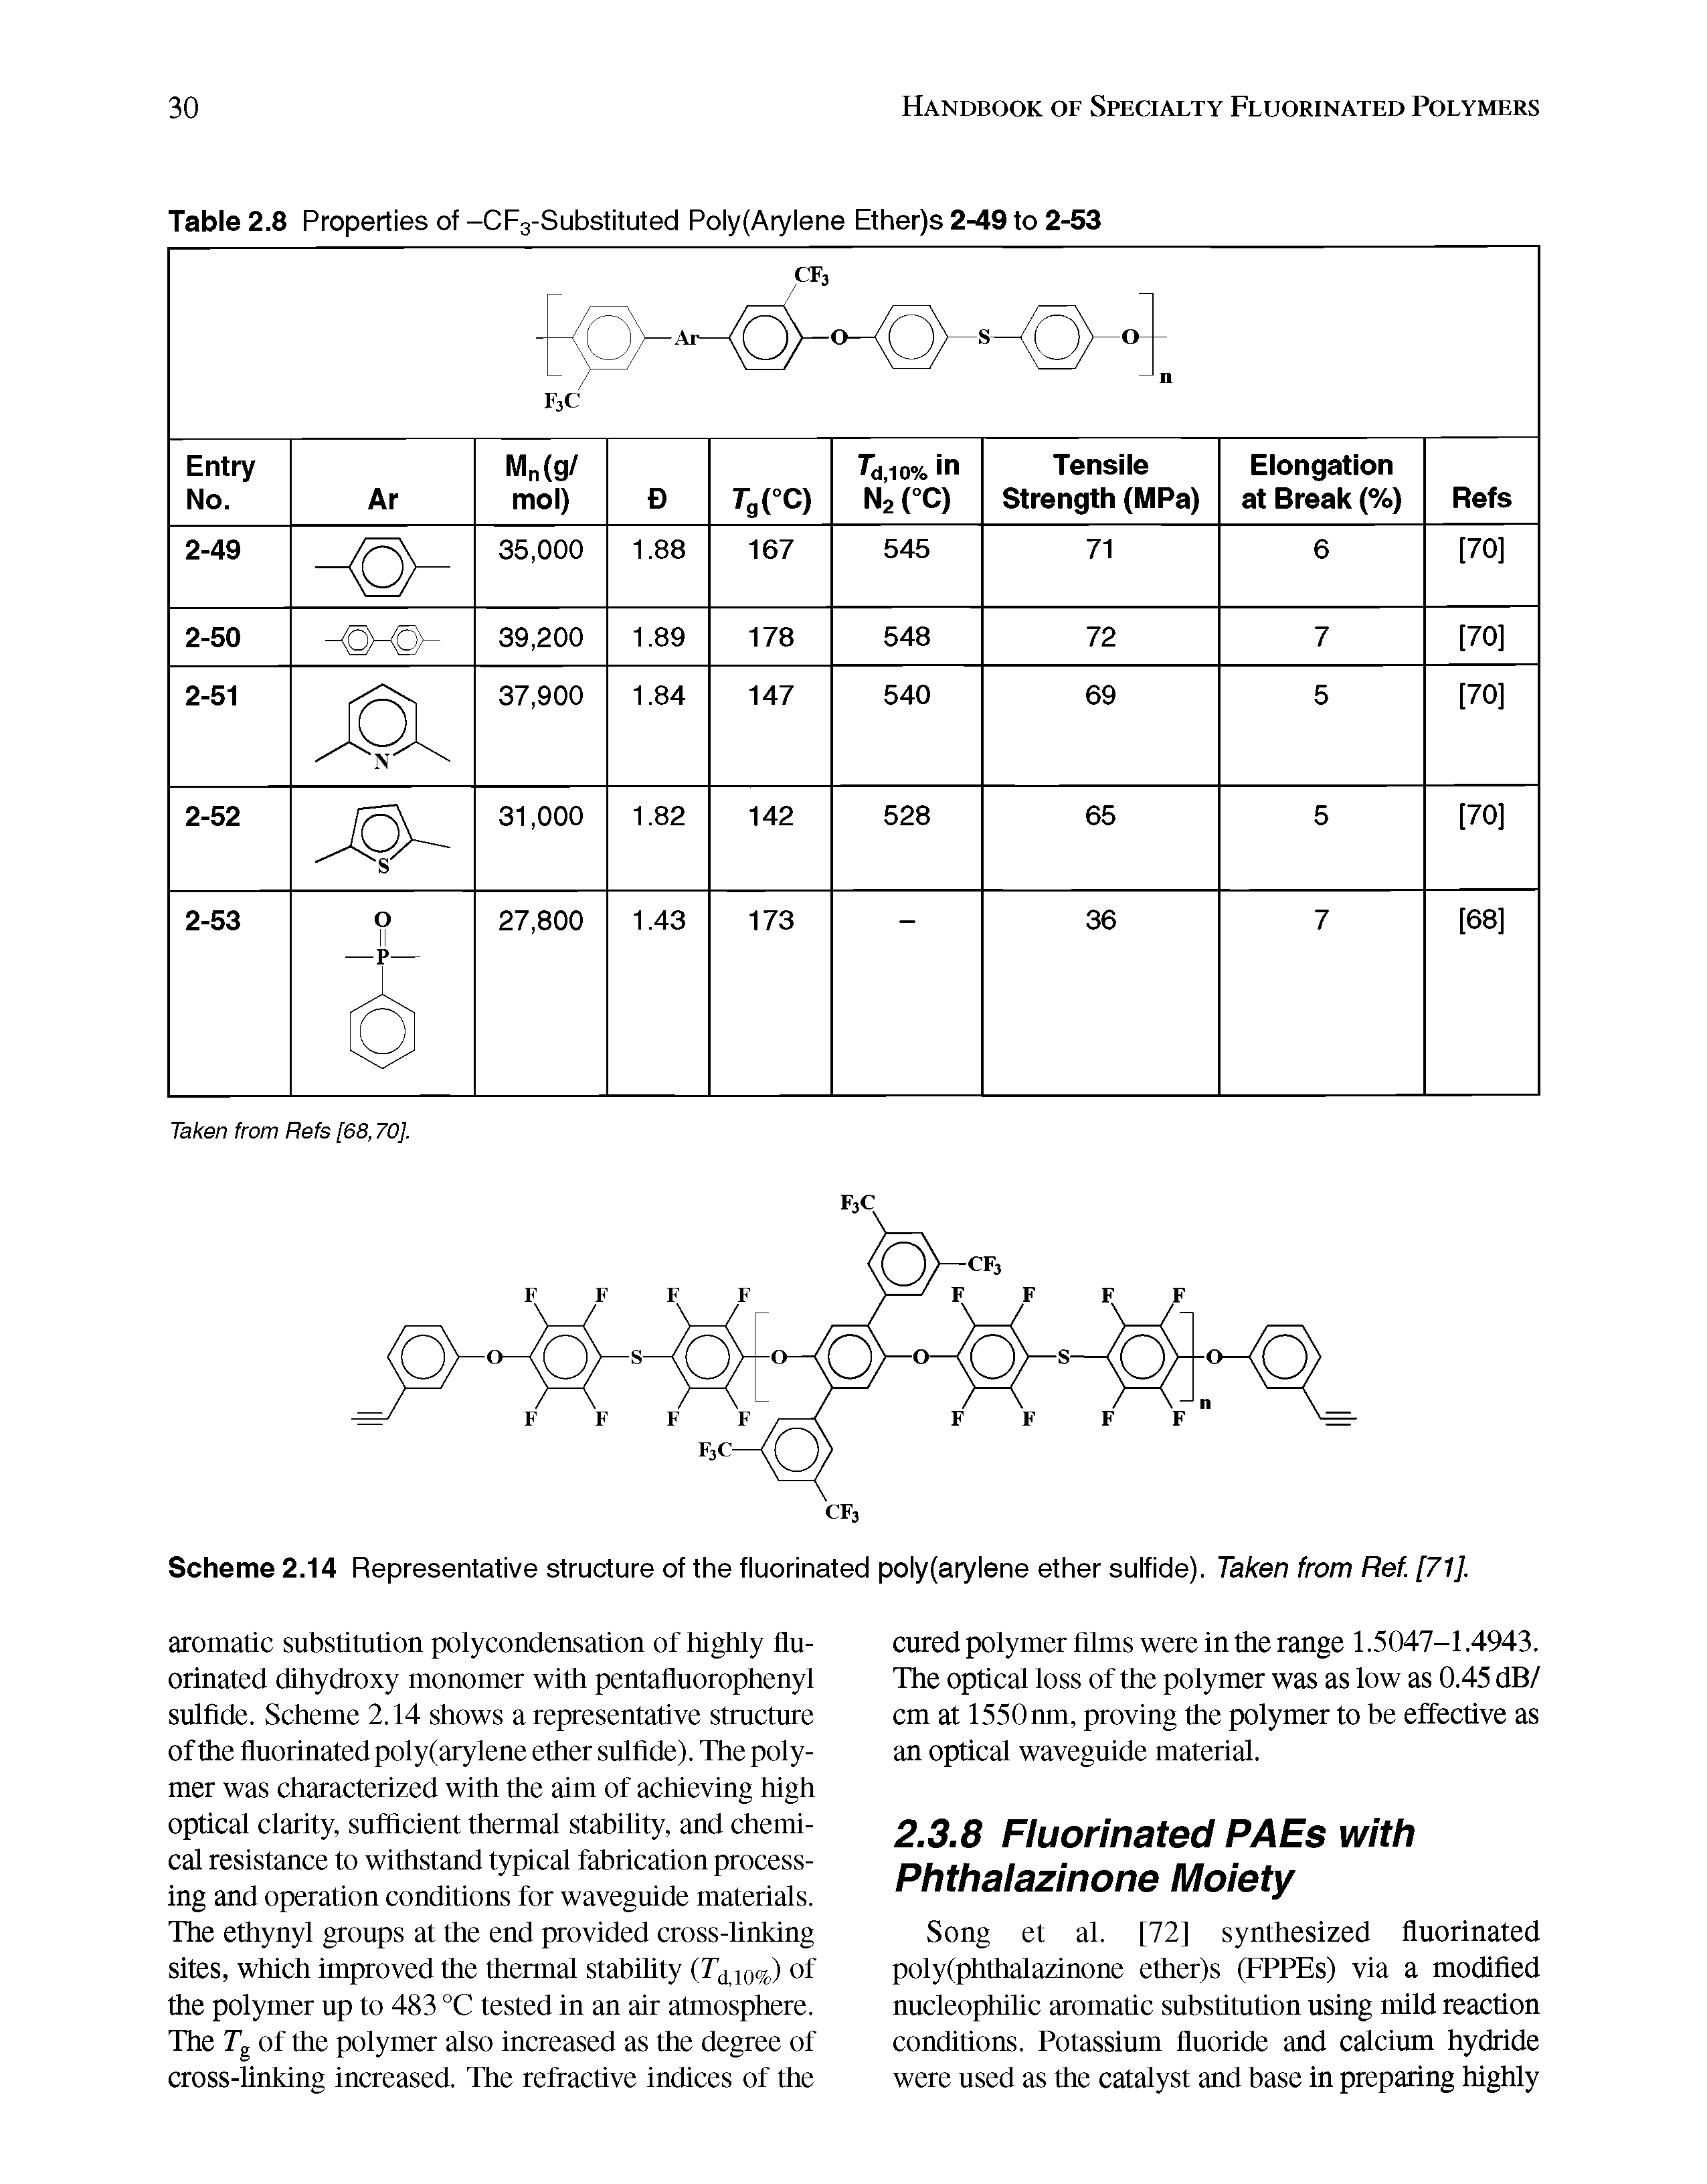 Scheme 2.14 Representative structure of the fluorinated poly(arylene ether sulfide). Taken from Ref. [71],...